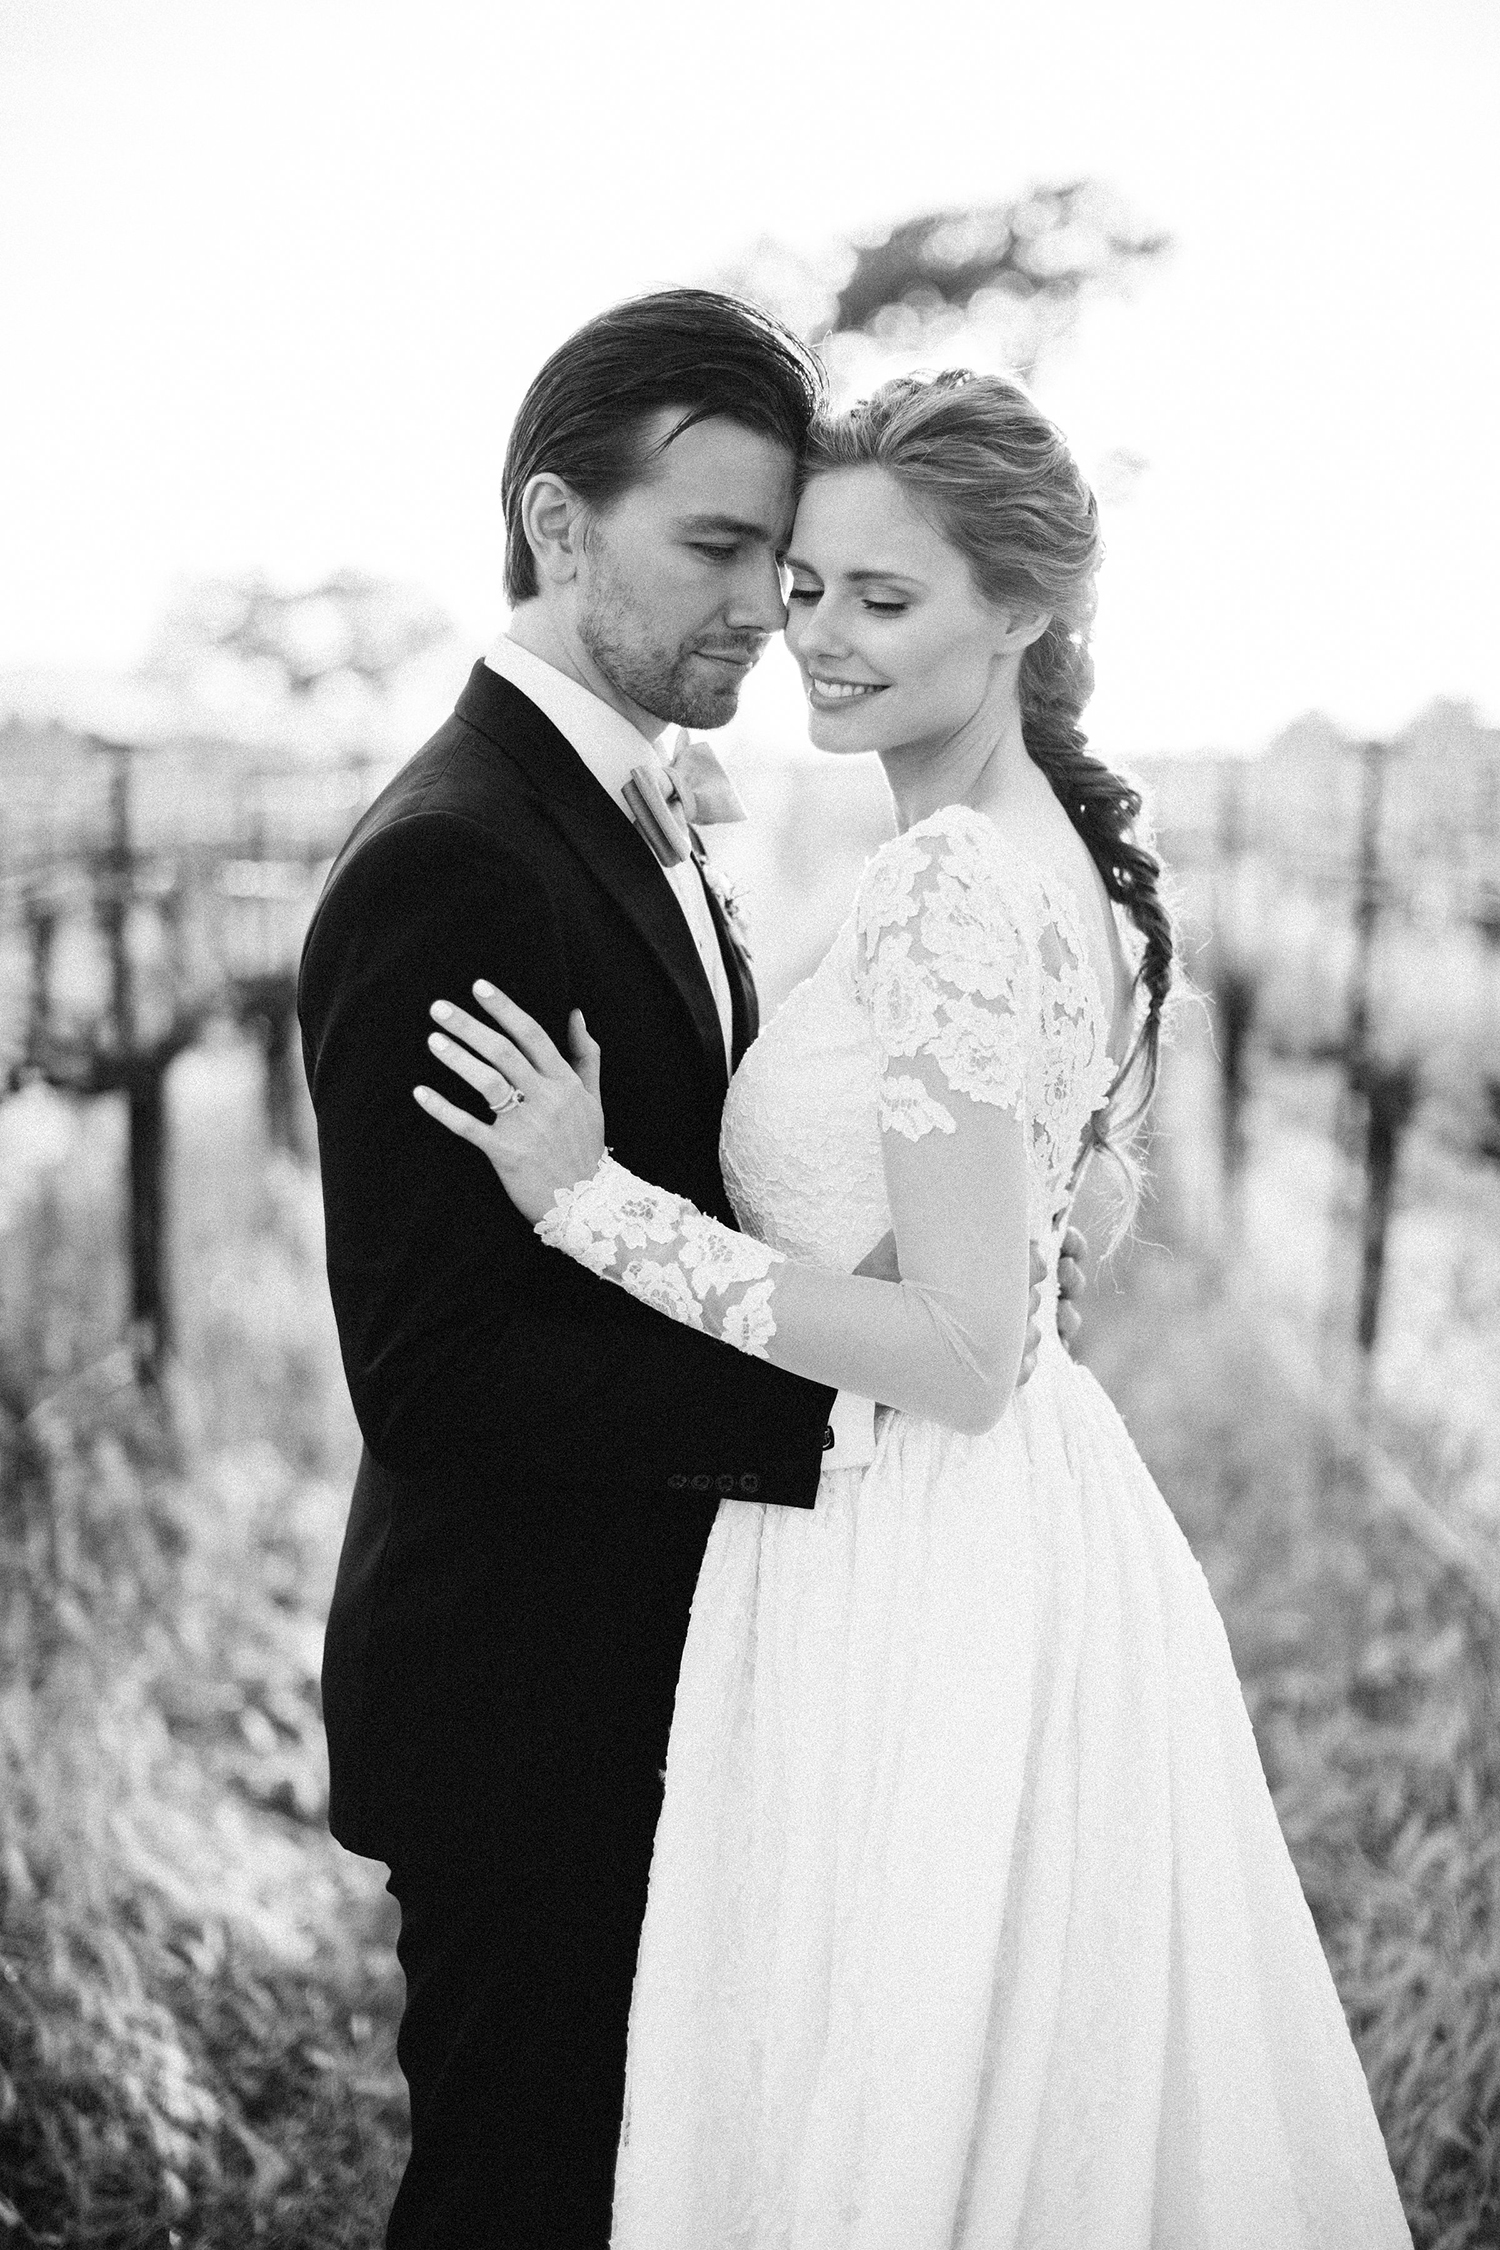 Miss USA 2011 Alyssa Campanella of The A List blog and Reign star Torrance Coombs celebrating the wedding on April 2, 2016